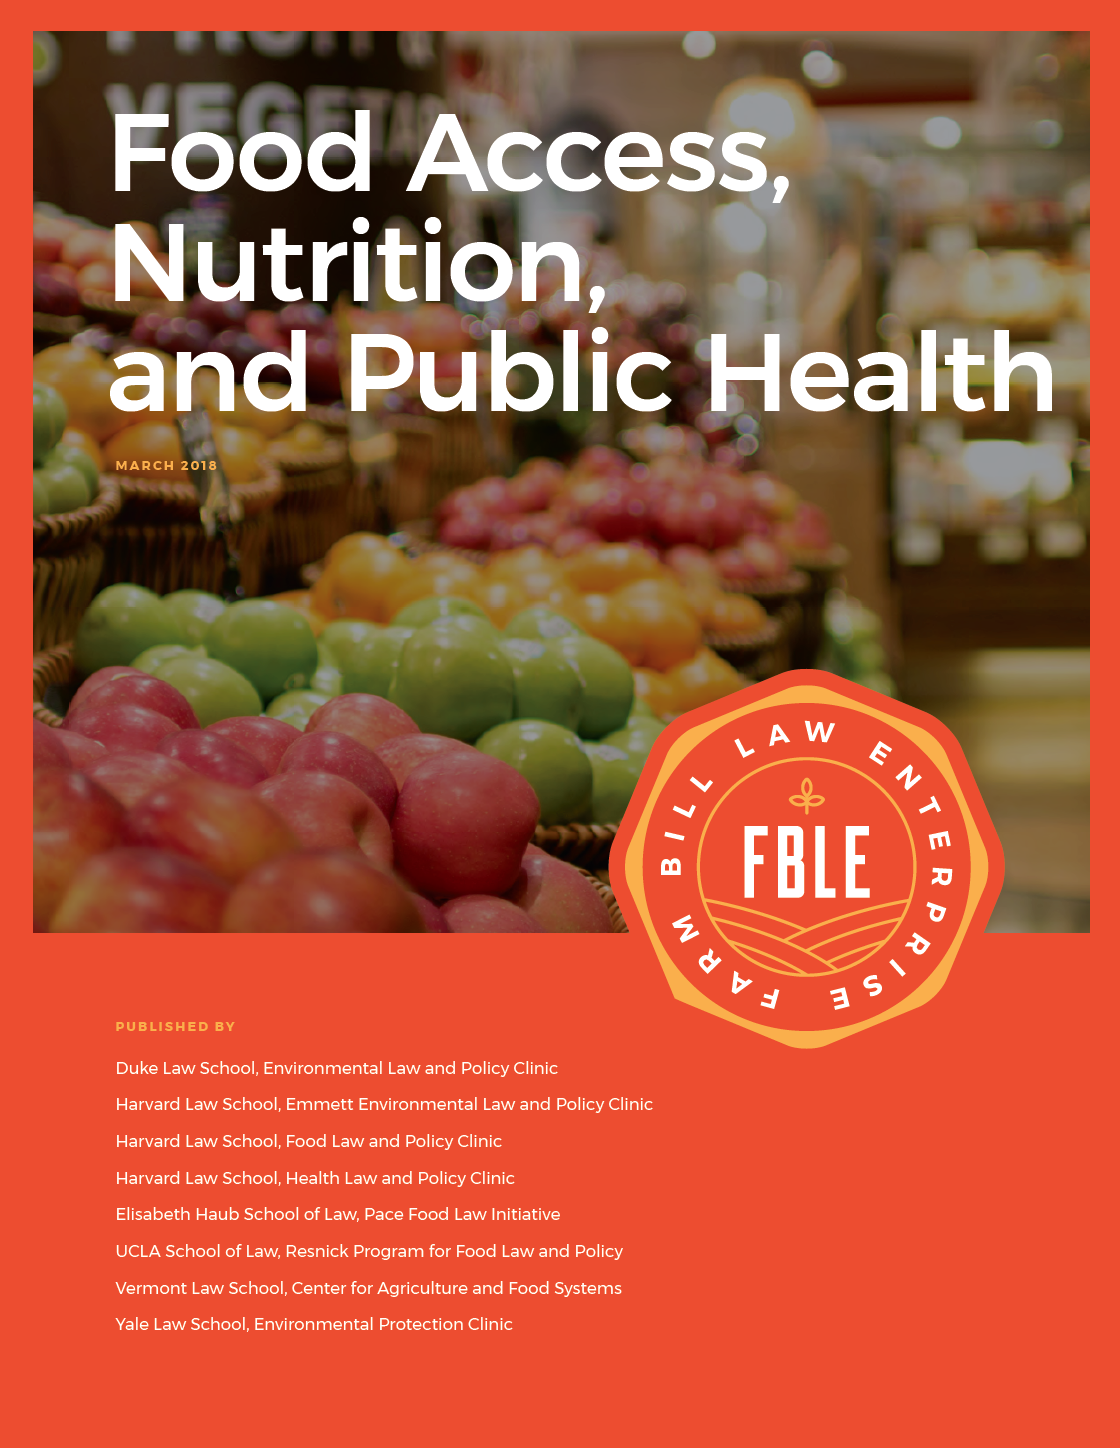 Food Access, Nutrition, and Public Health